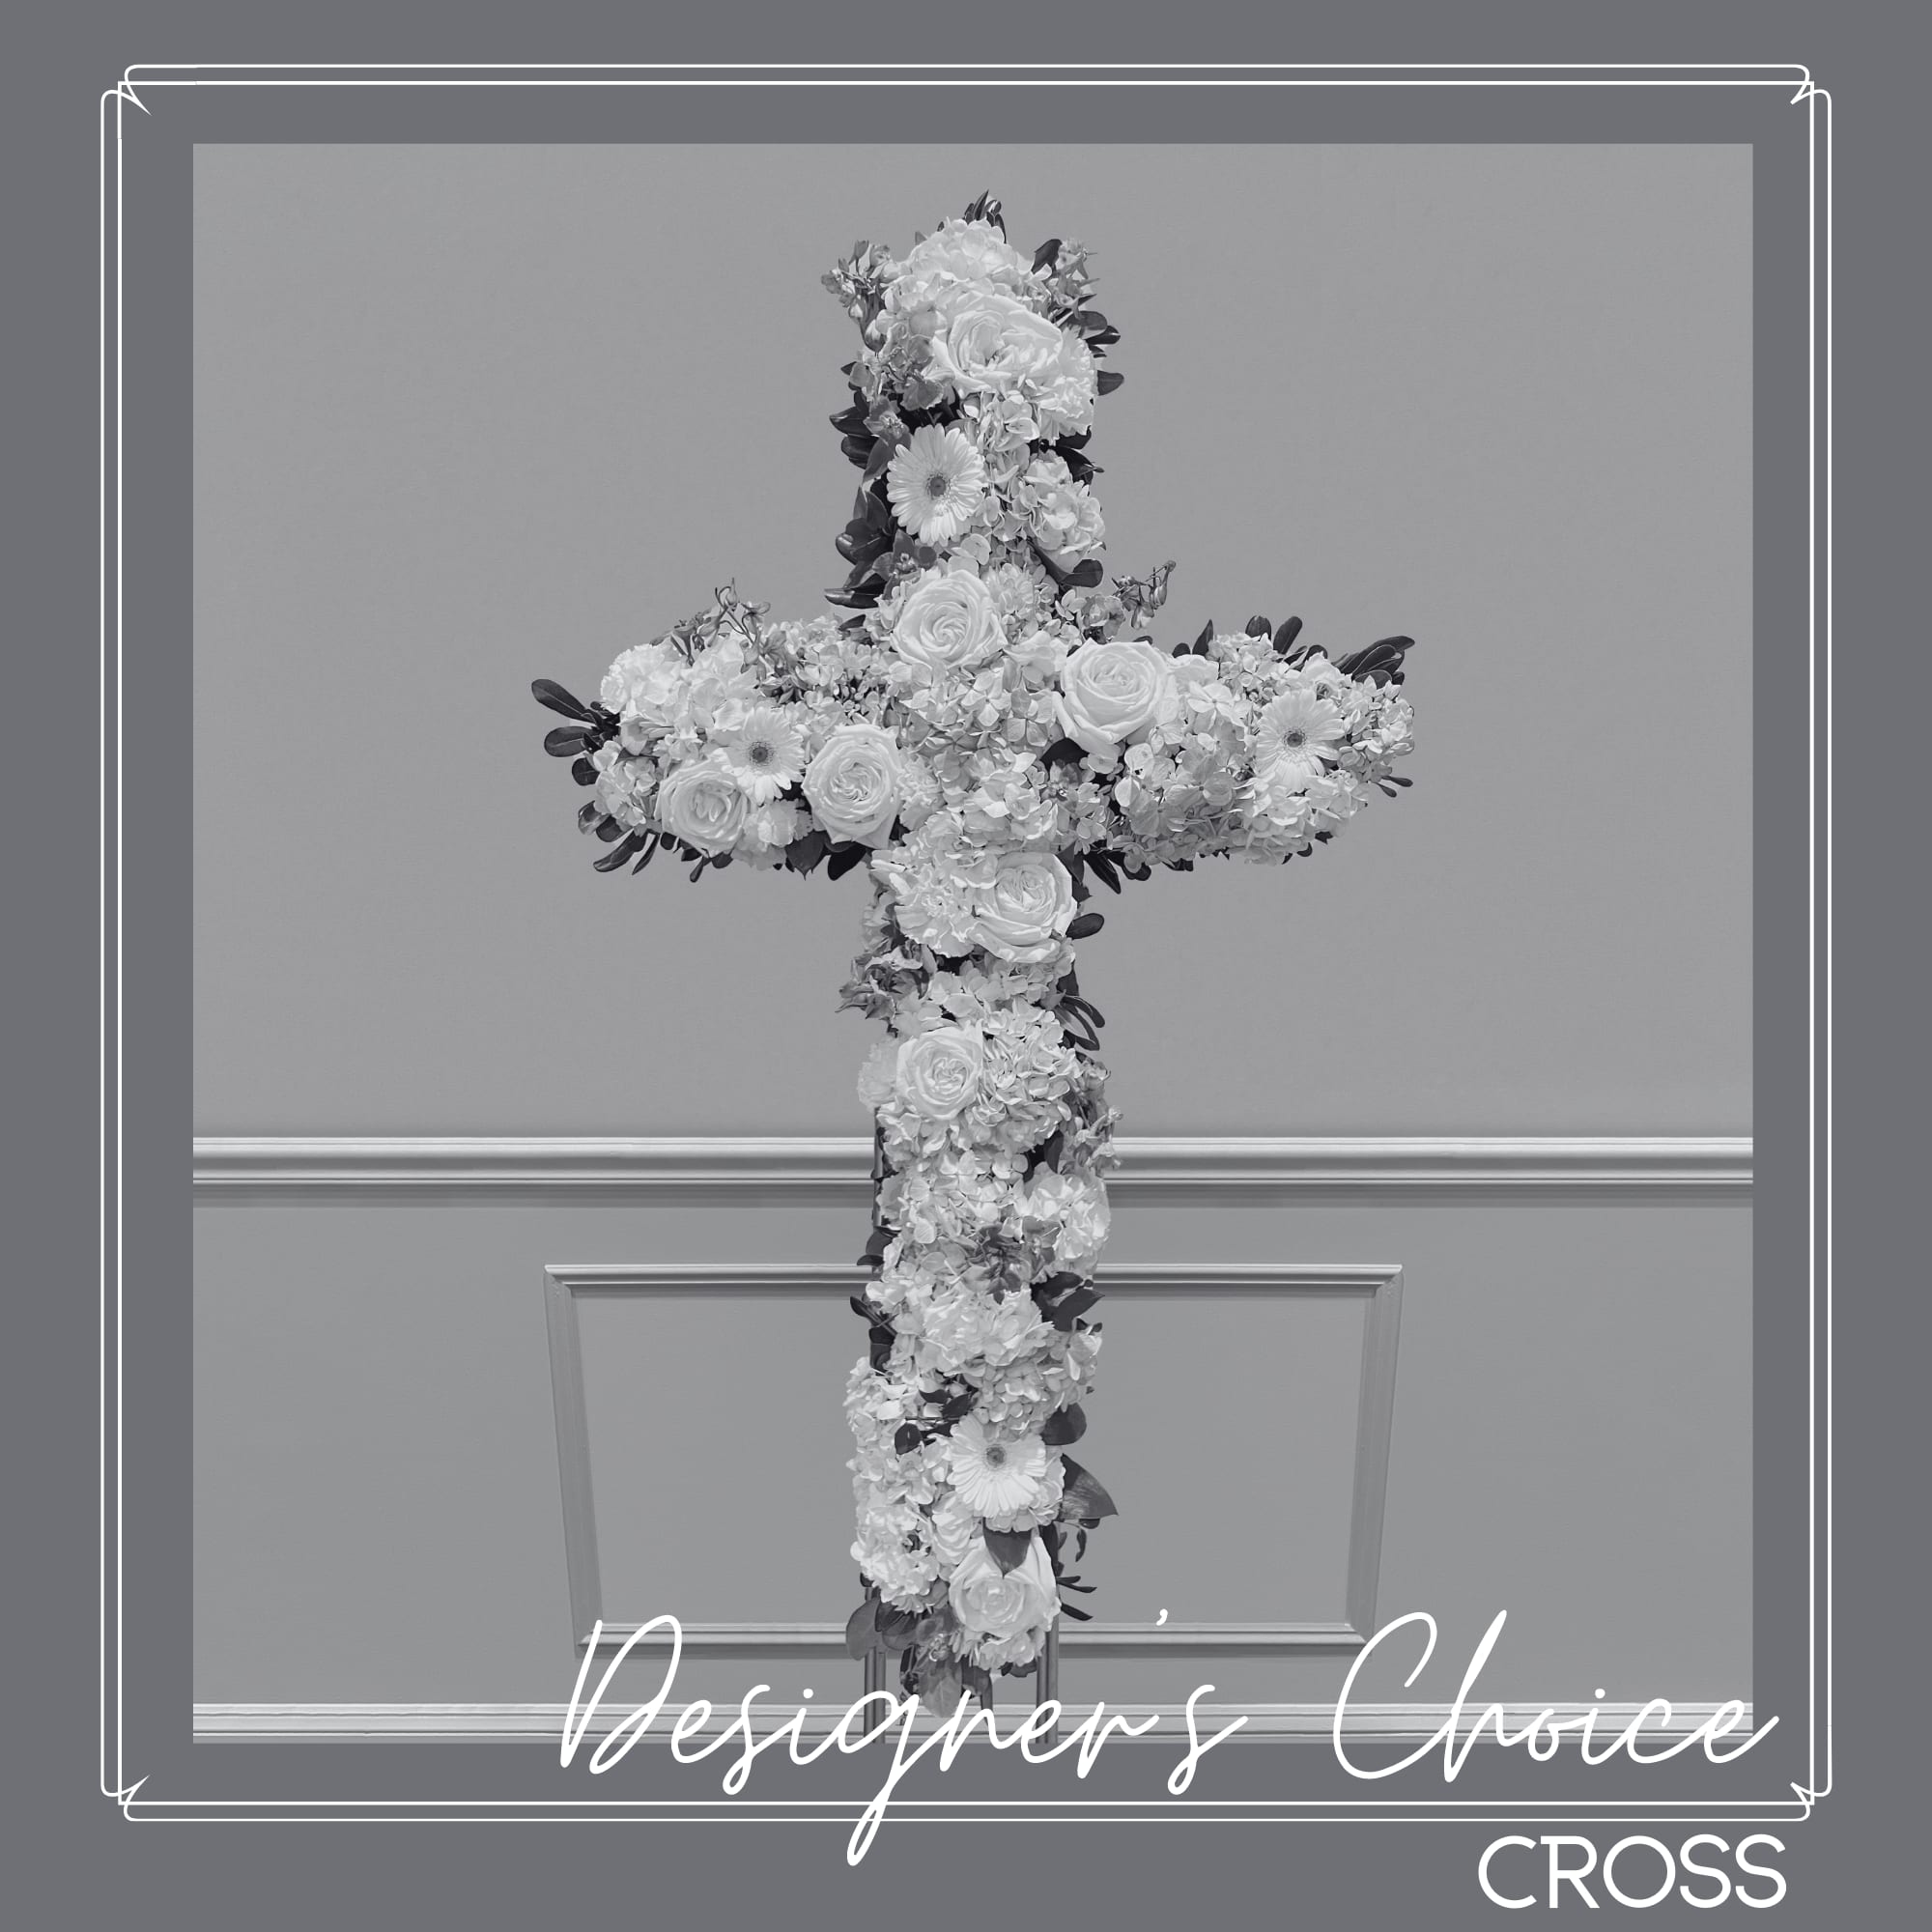 Cross - Designer's Choice - Our designers will create a beautiful funeral cross to display on an easel which that would be appropriate a wake, memorial service or church setting.